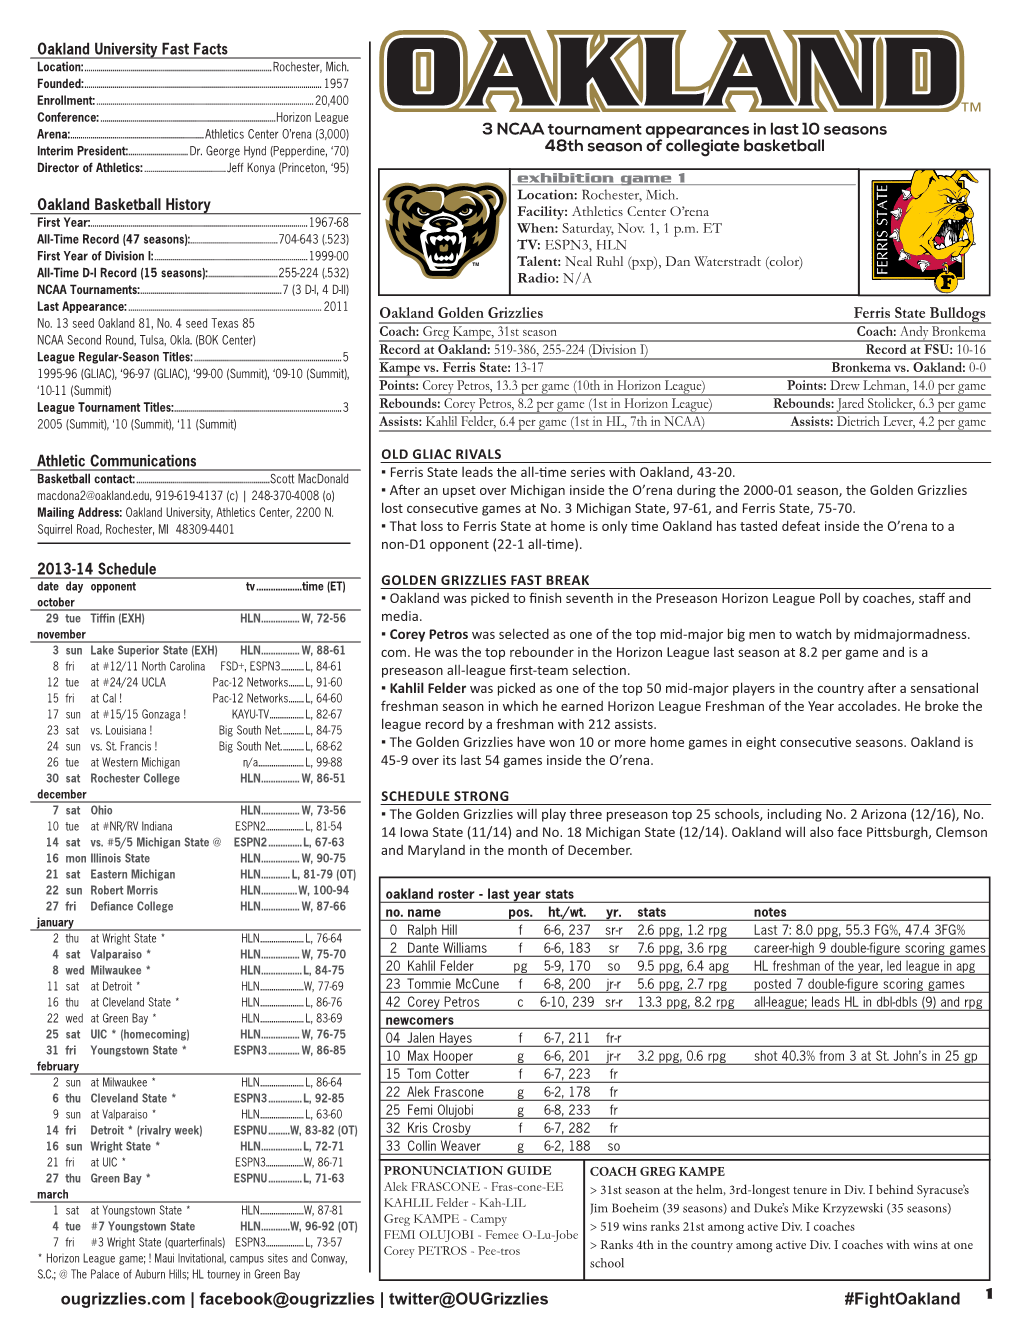 Twitter@Ougrizzlies #Fightoakland 1 Oakland University Fast Facts